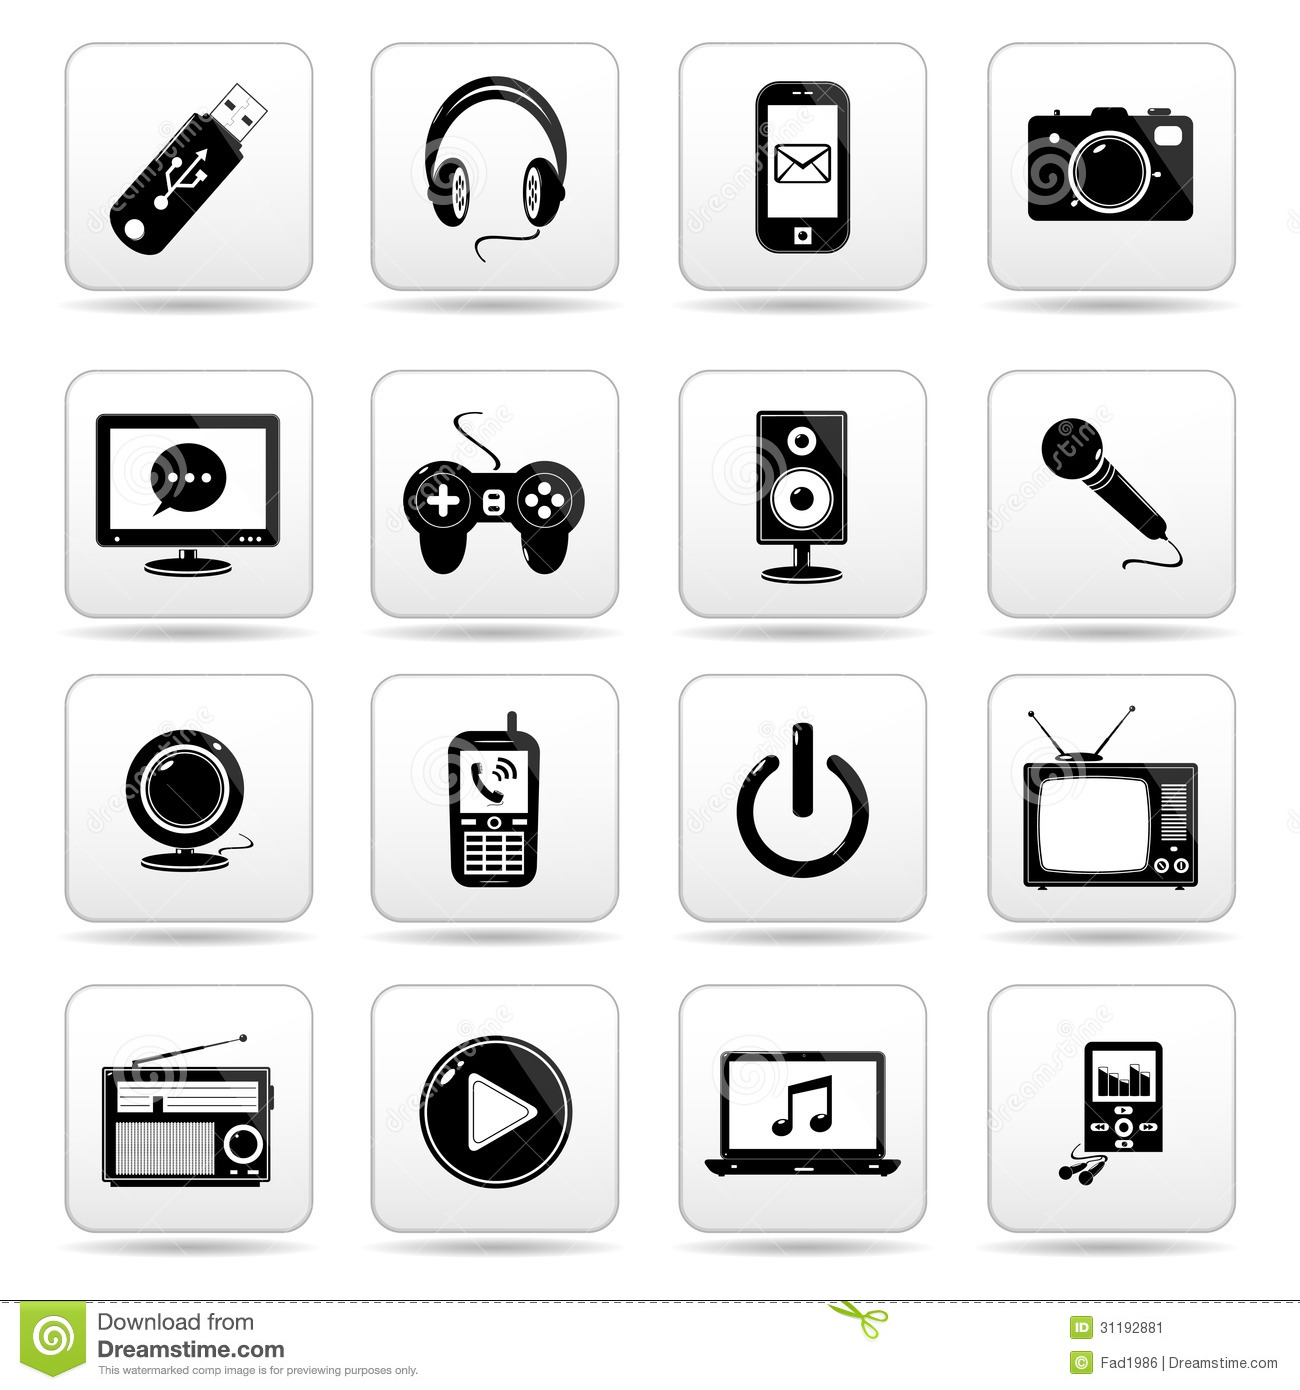 Technology Icons Black and White